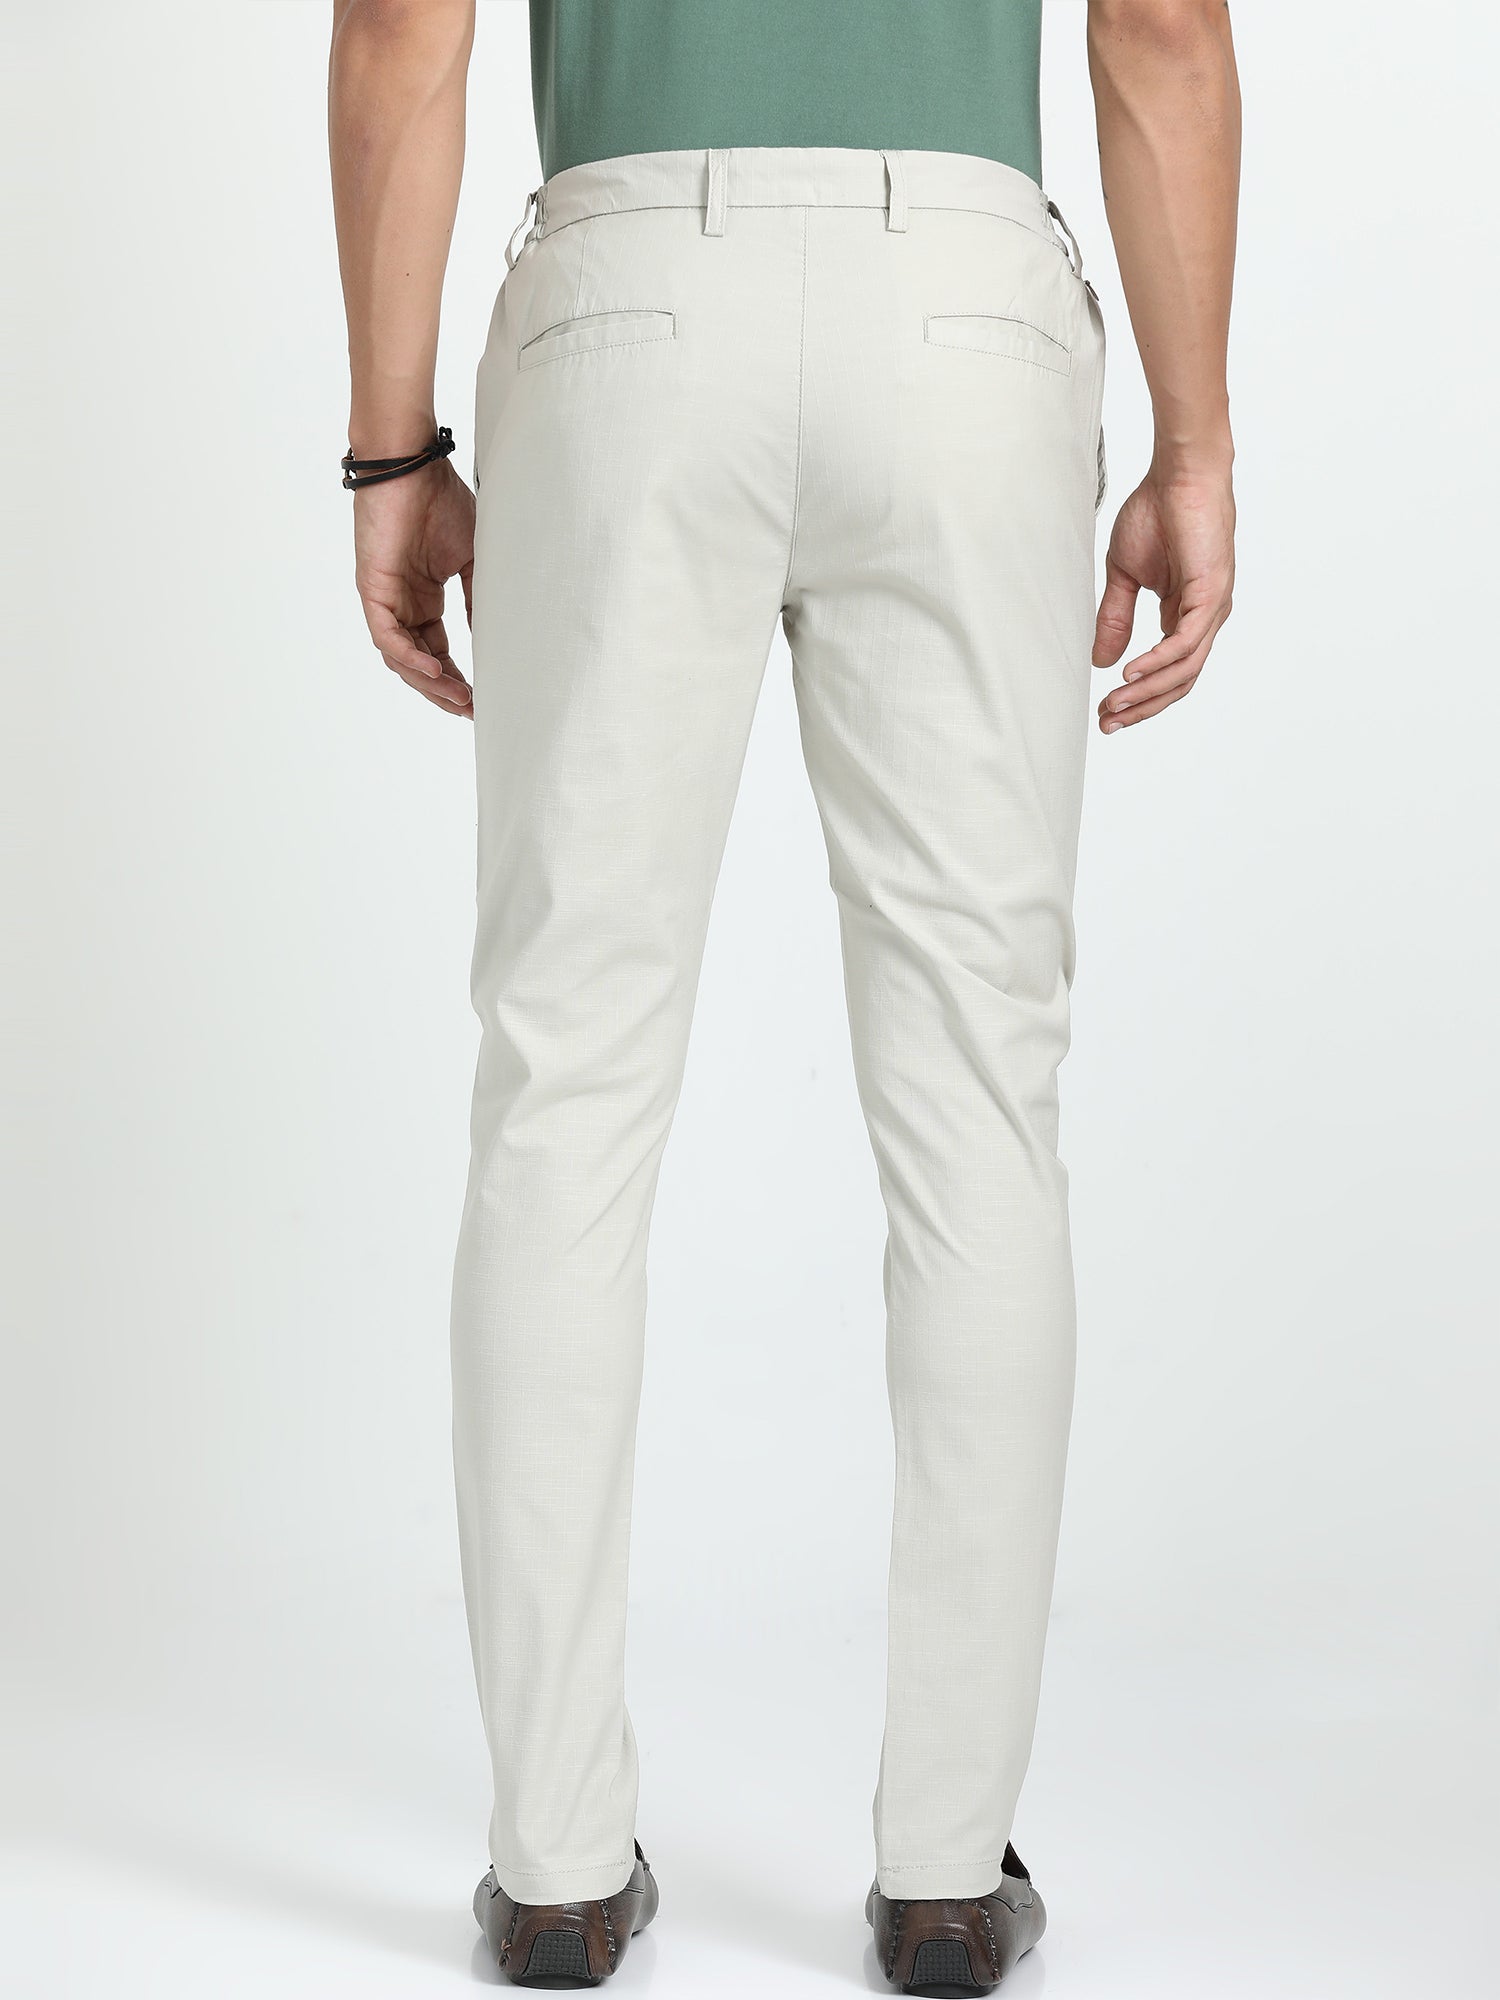 Chinos for Men | Buy Chino Pants for Men Online in India - Westside – Page 2